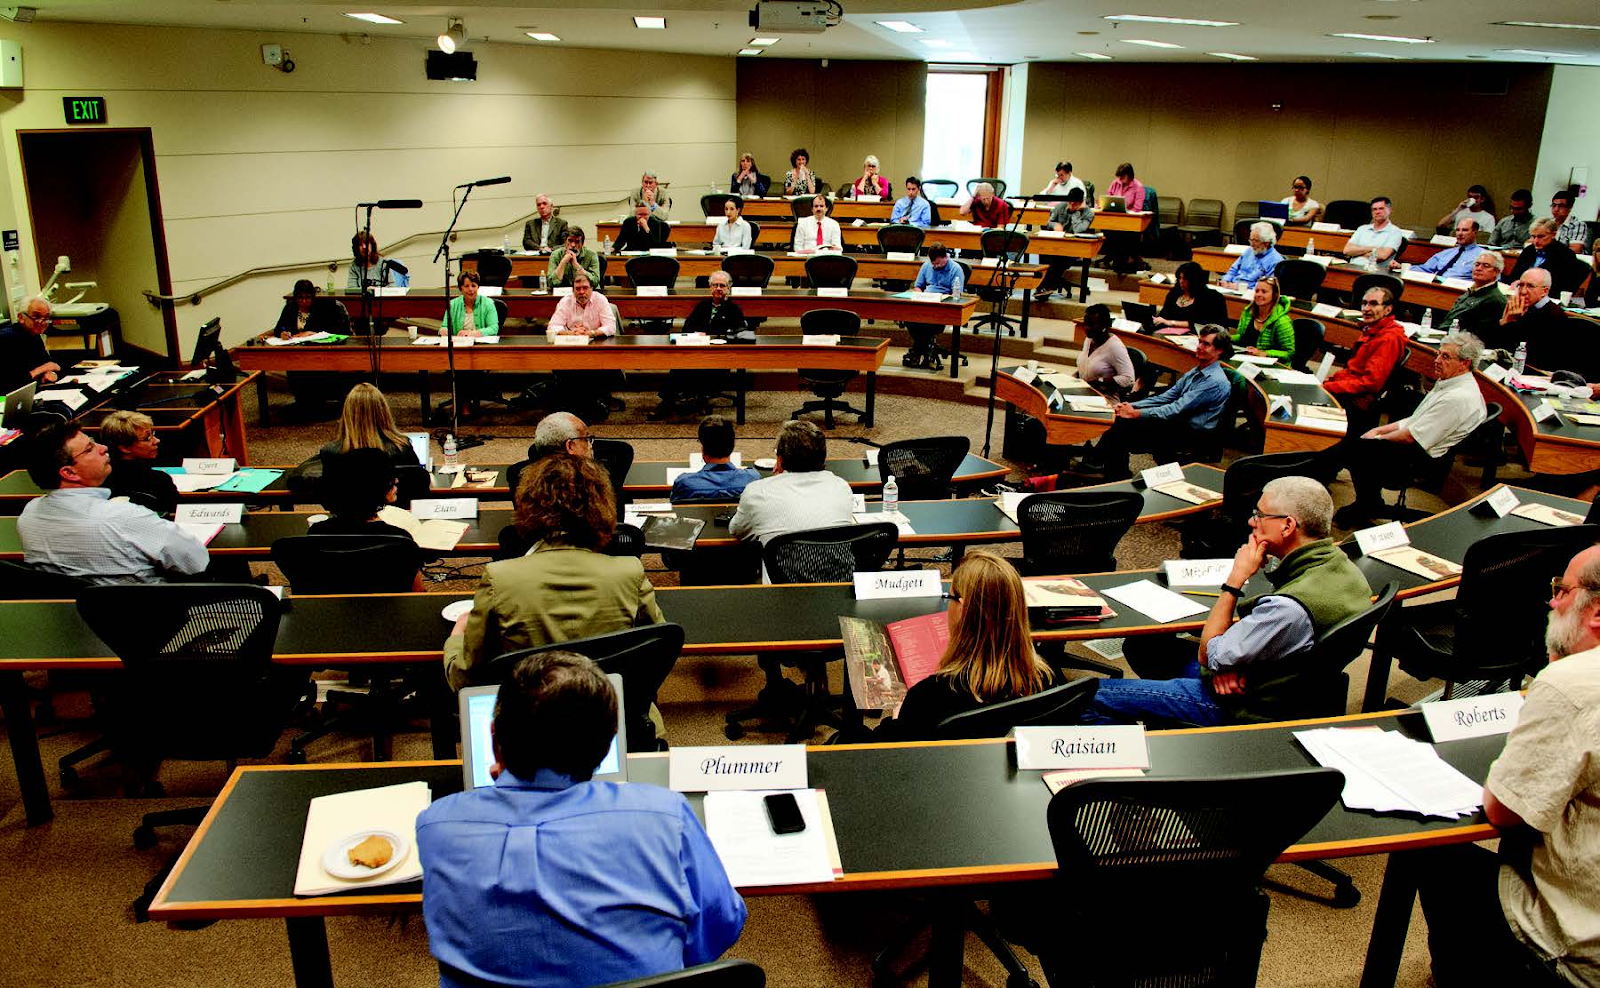 stanford university classrooms